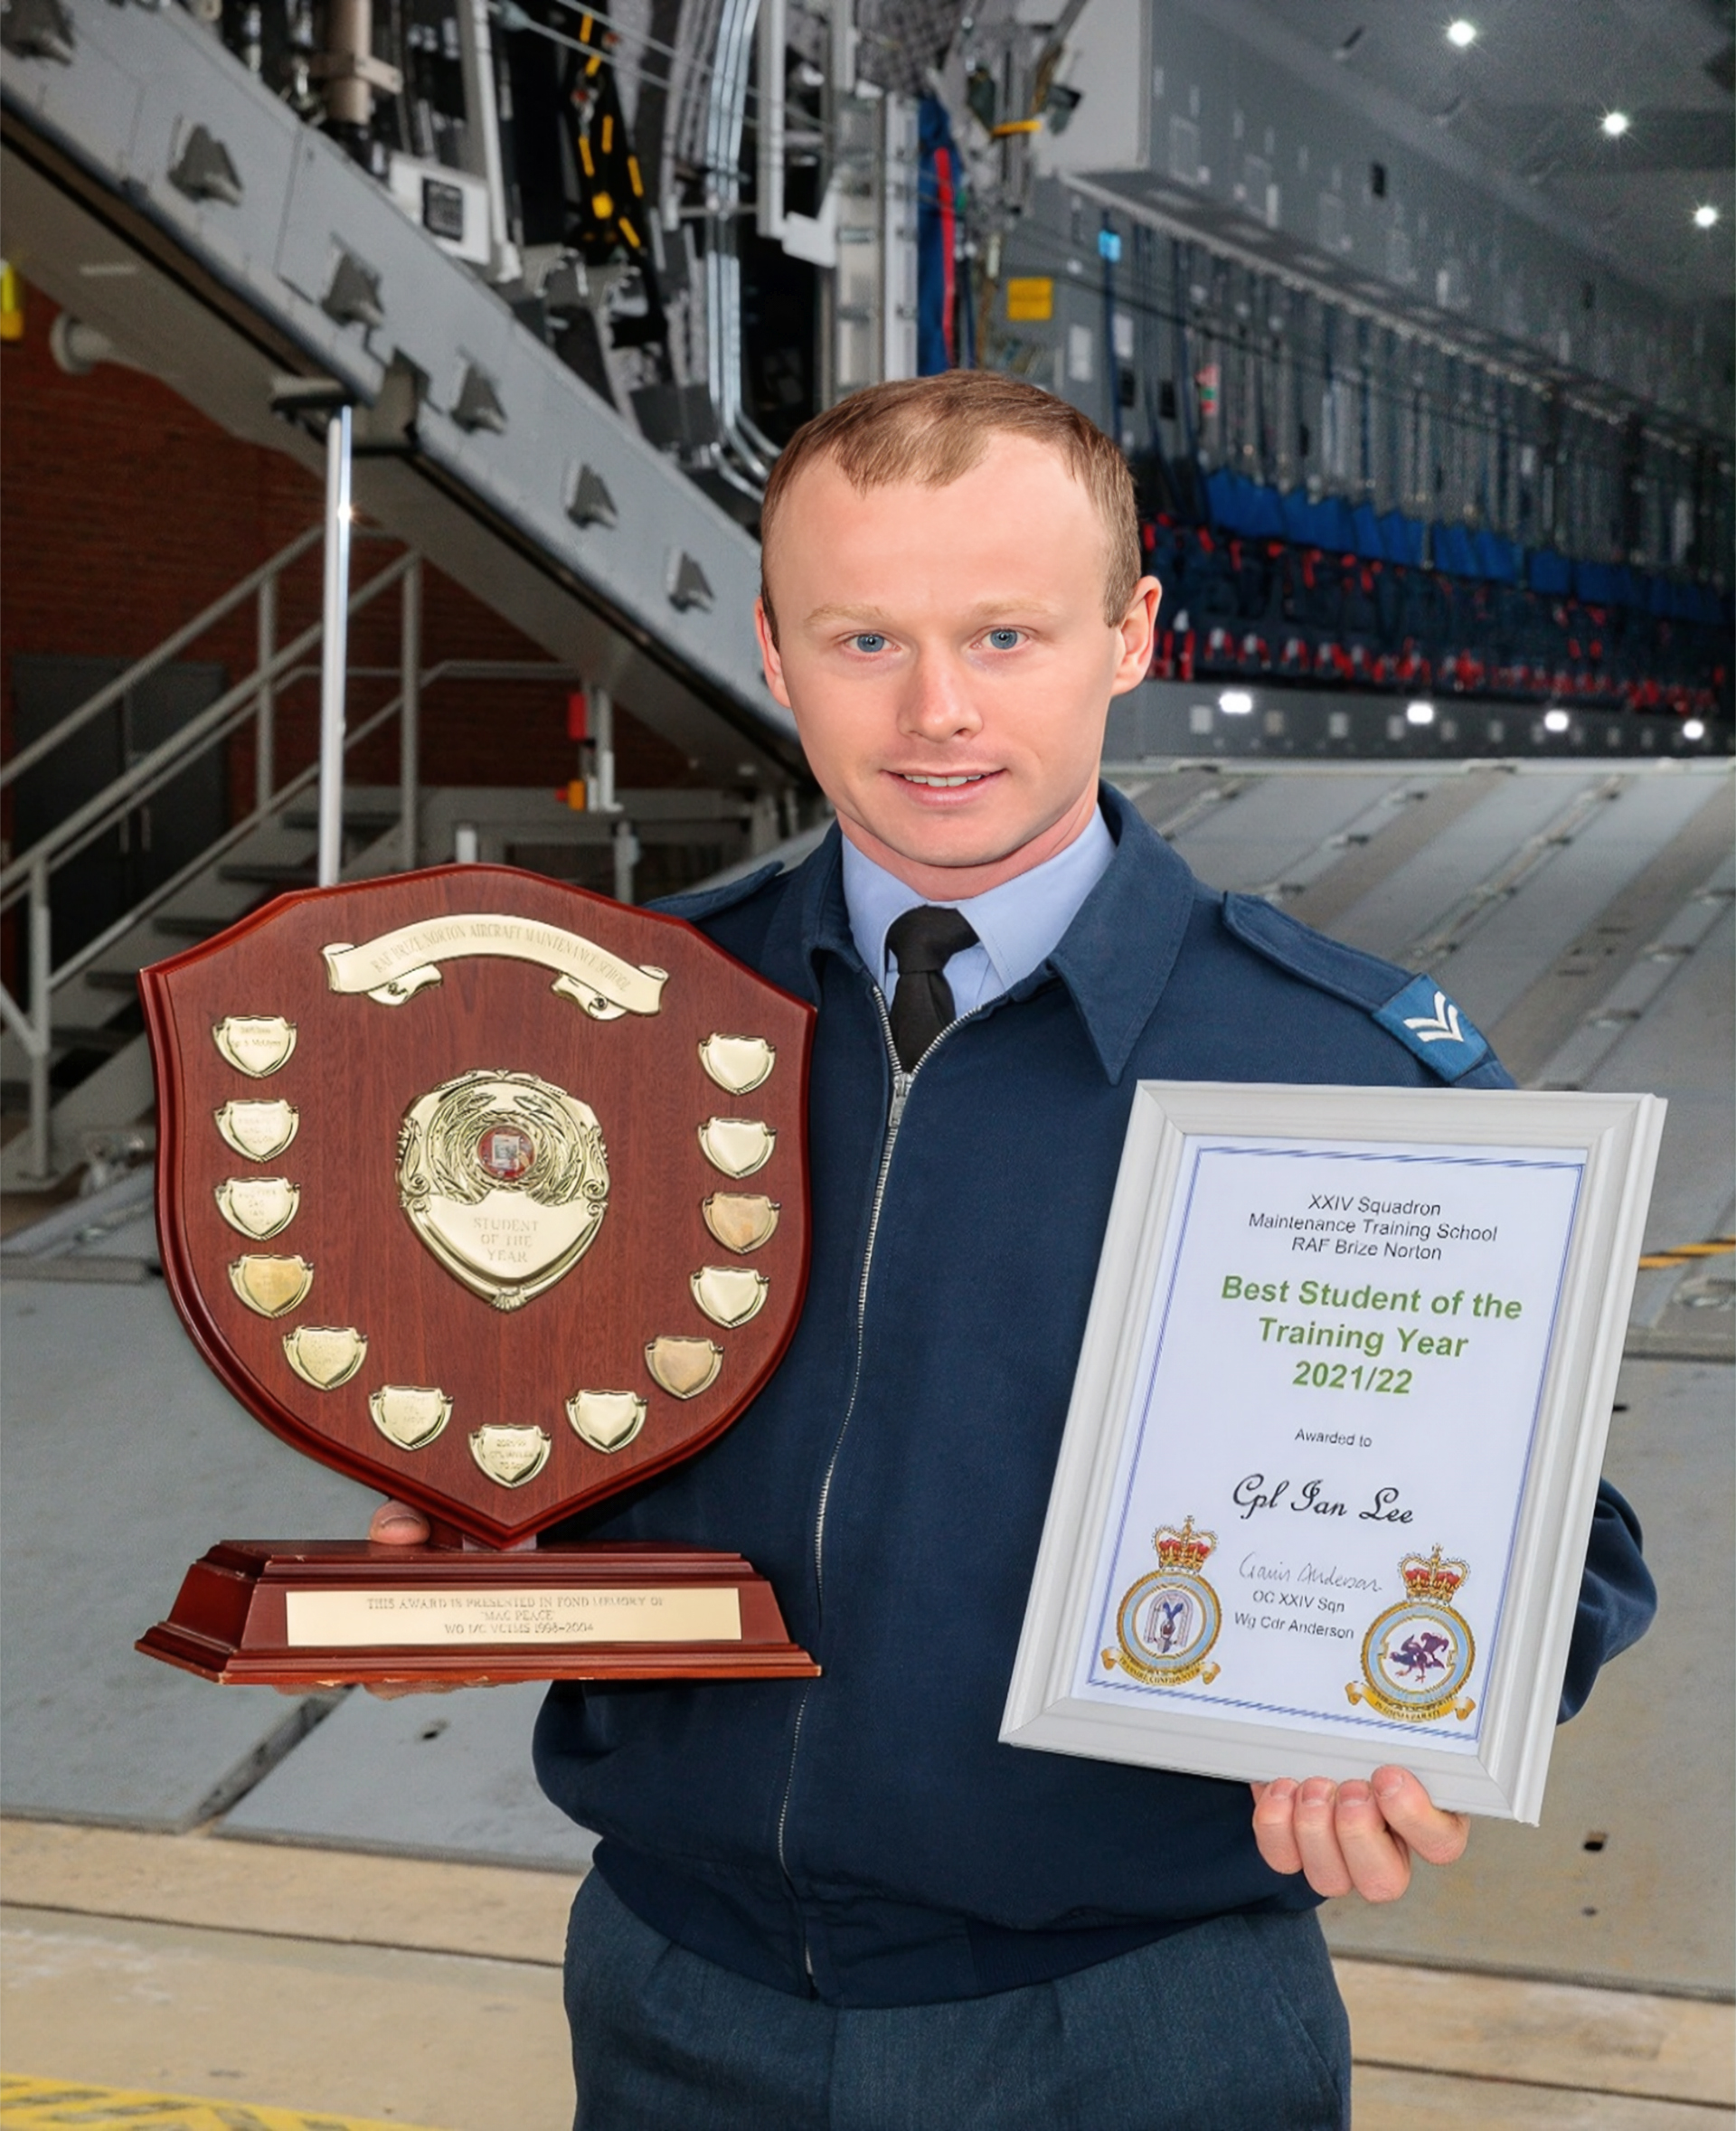 Corporal Lee Receives 2022 Best Student Award